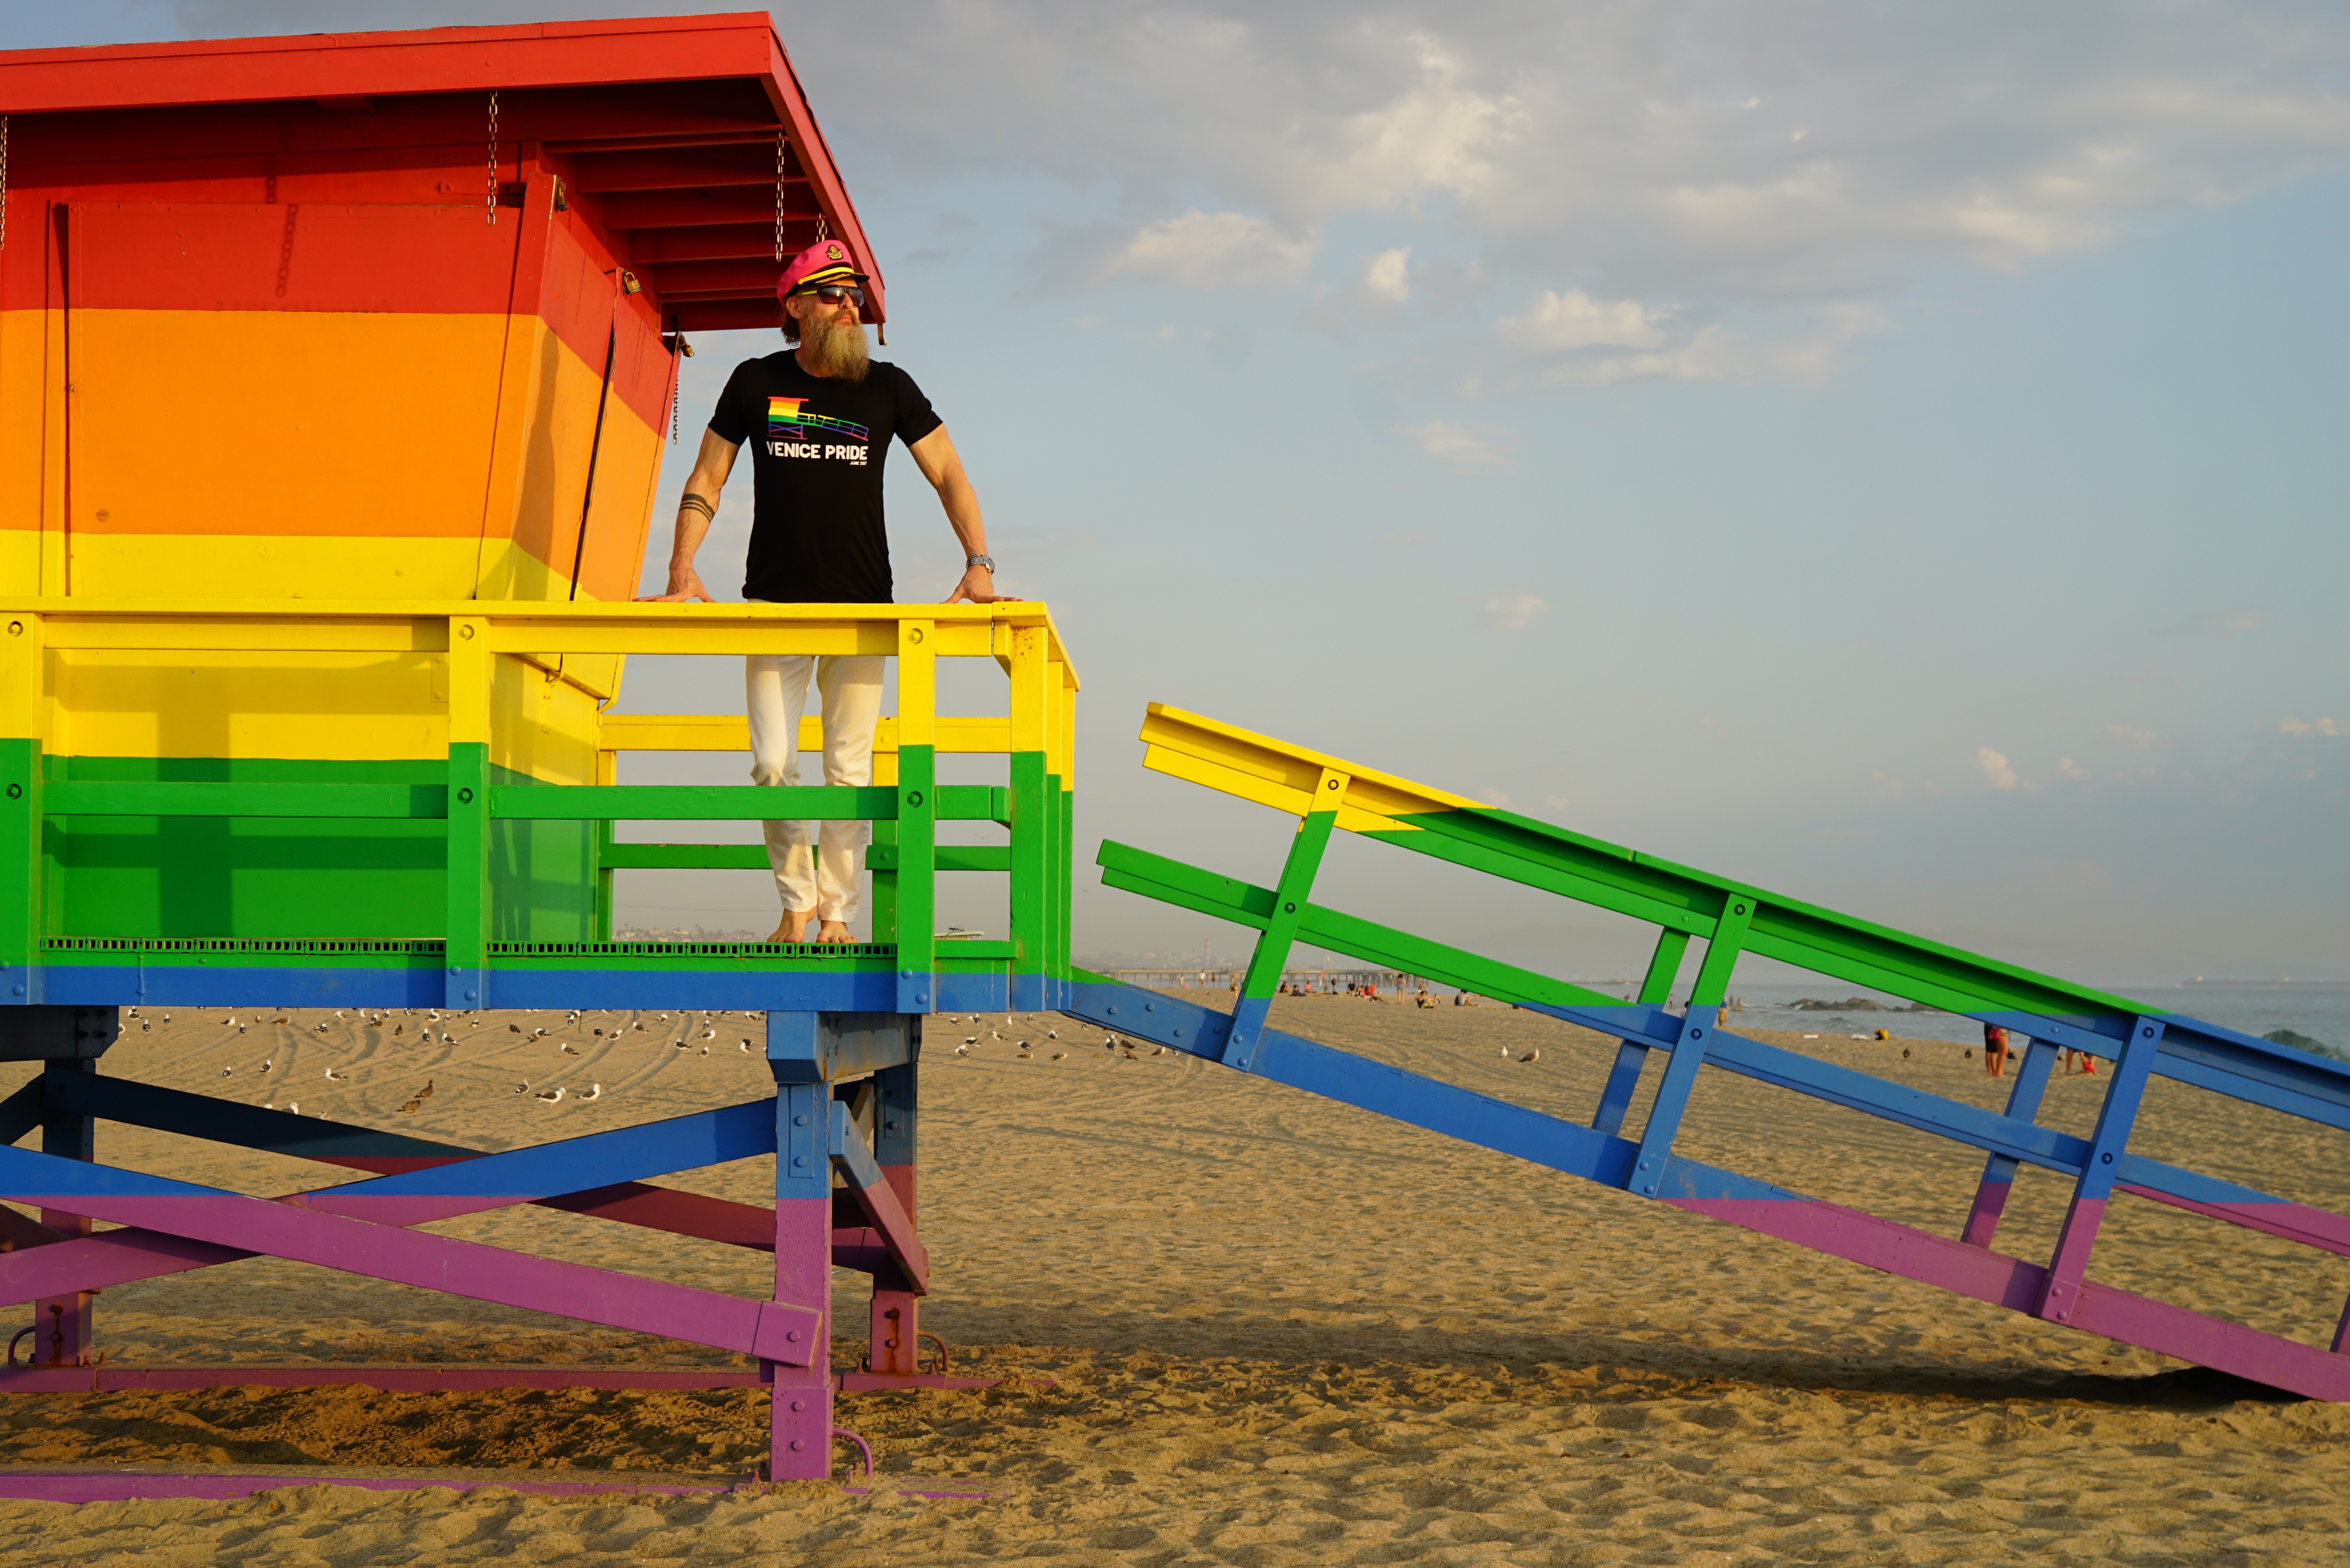 Venice Beach Rainbow Lifeguard Tower Is Saved | L.A. Weekly